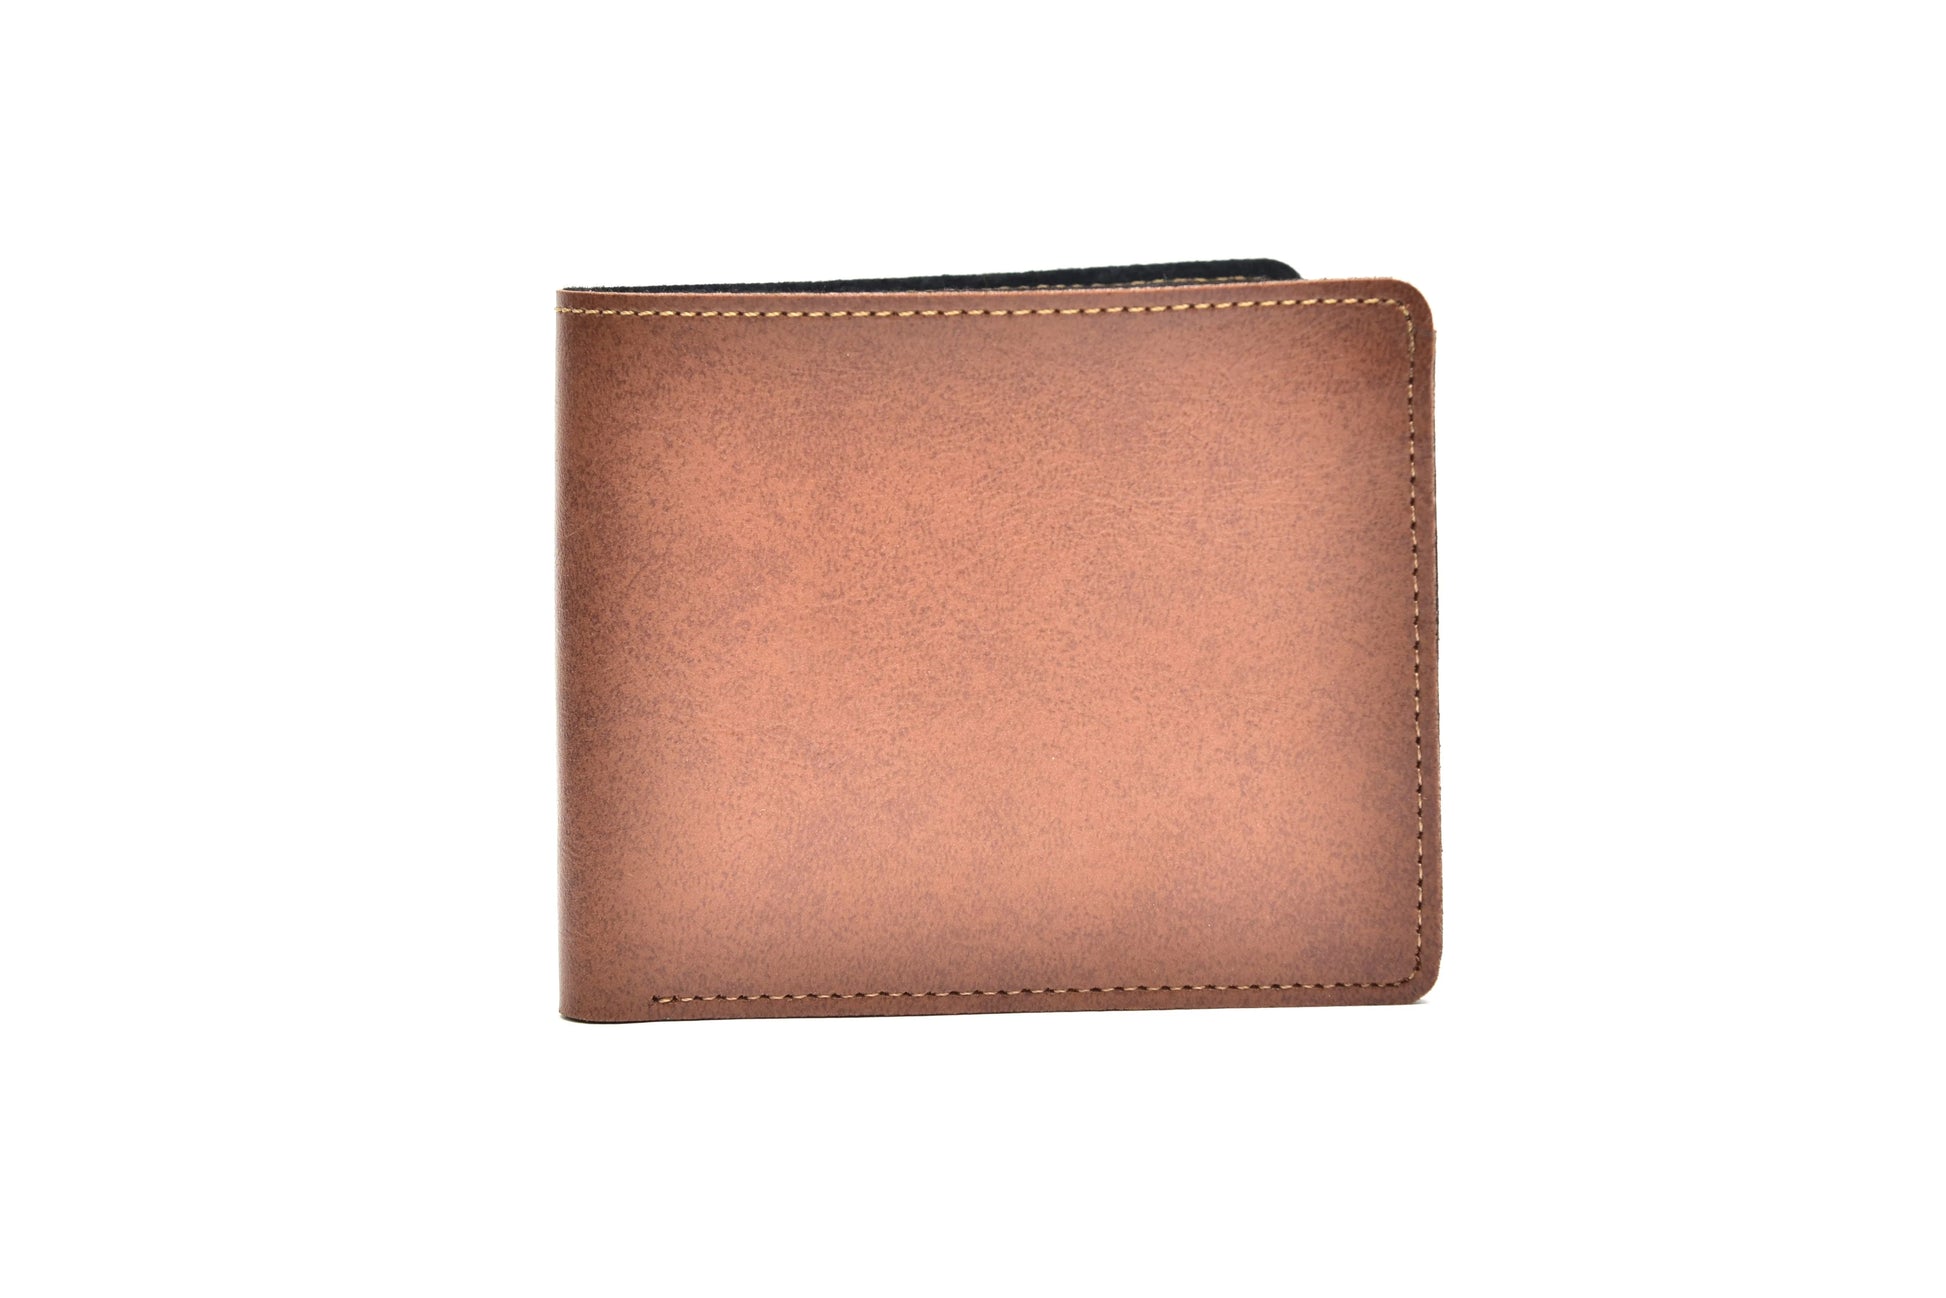 Get organized and keep your essentials close at hand with our customized leather wallet! With a variety of colors and styles to choose from, this wallet is both stylish and practical, making it the perfect choice for anyone looking for a functional accessory.